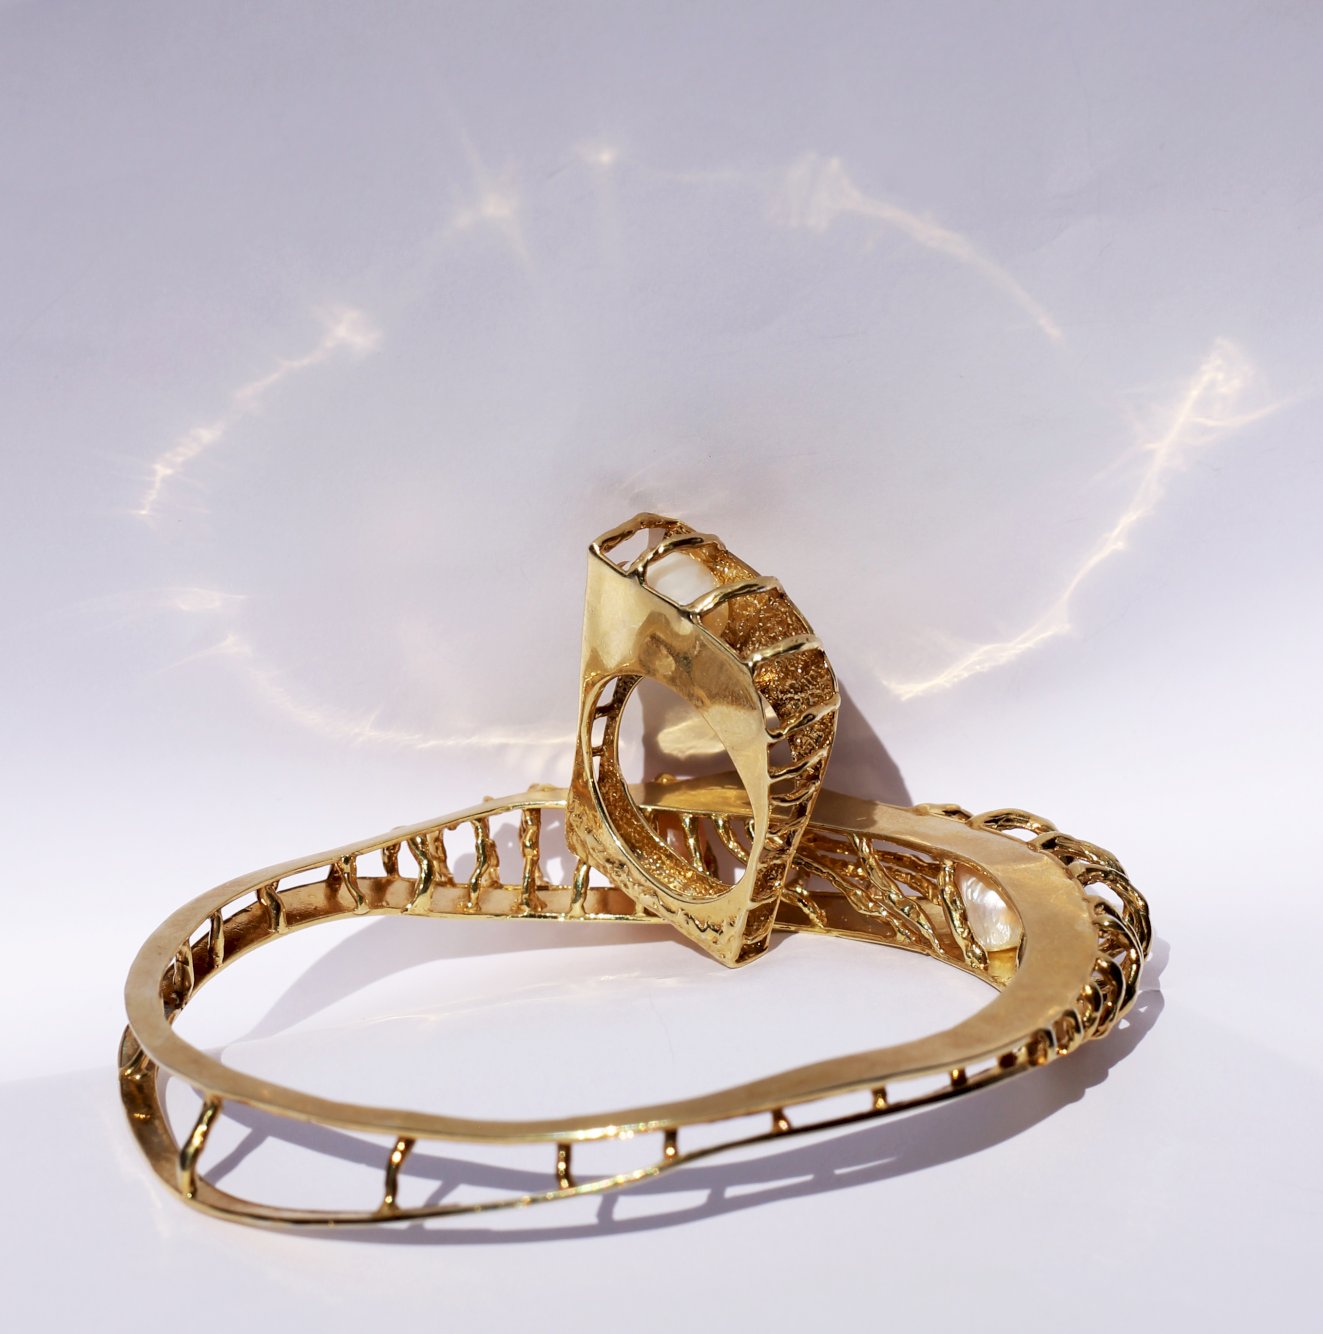 Cage armlet and Cage ring